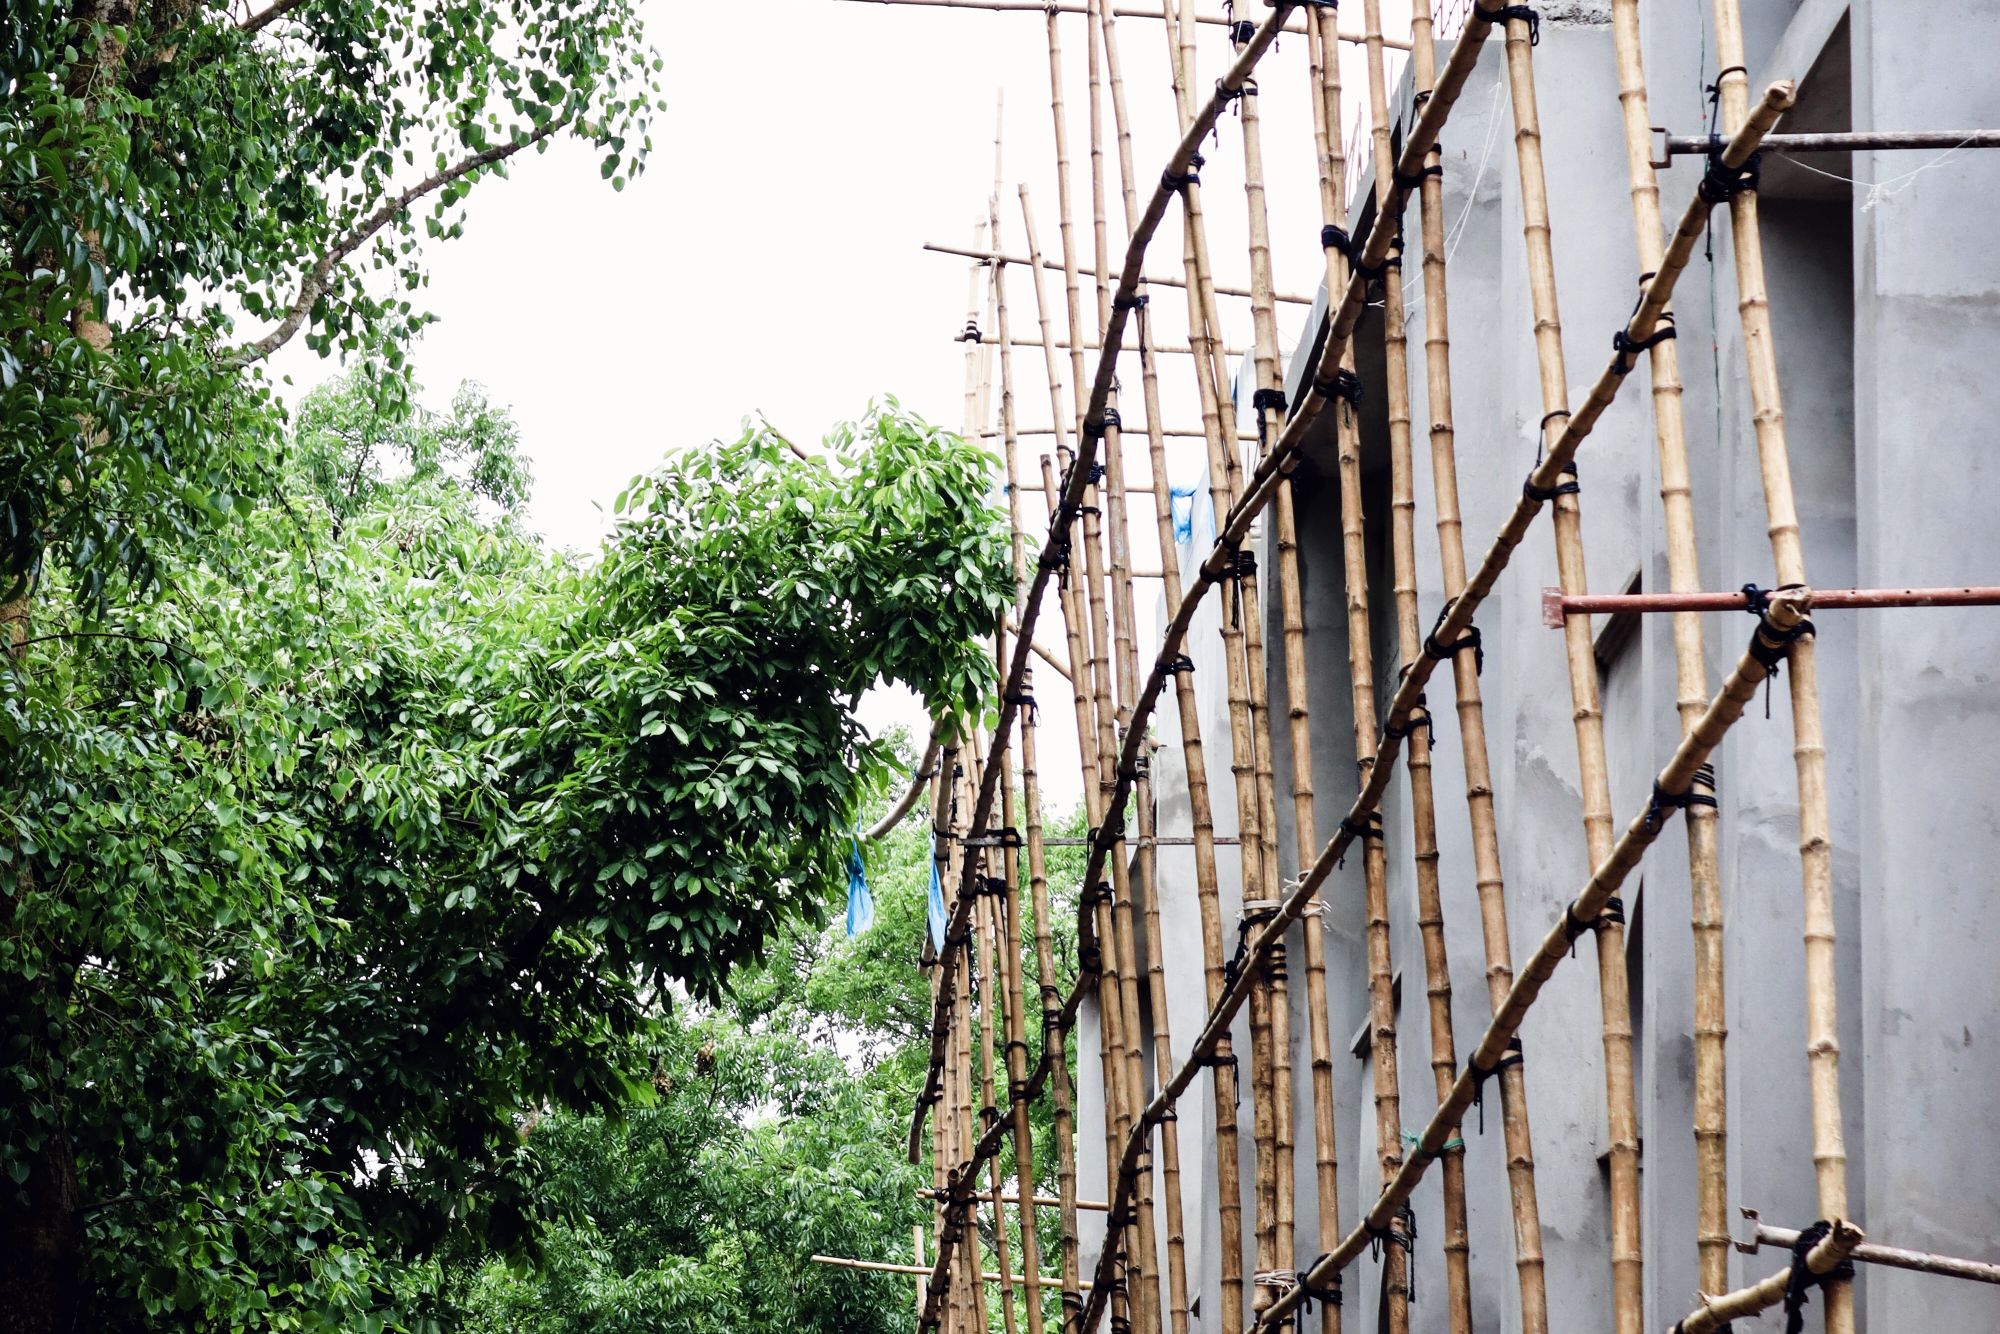 Bamboo poles being used as a building structure support